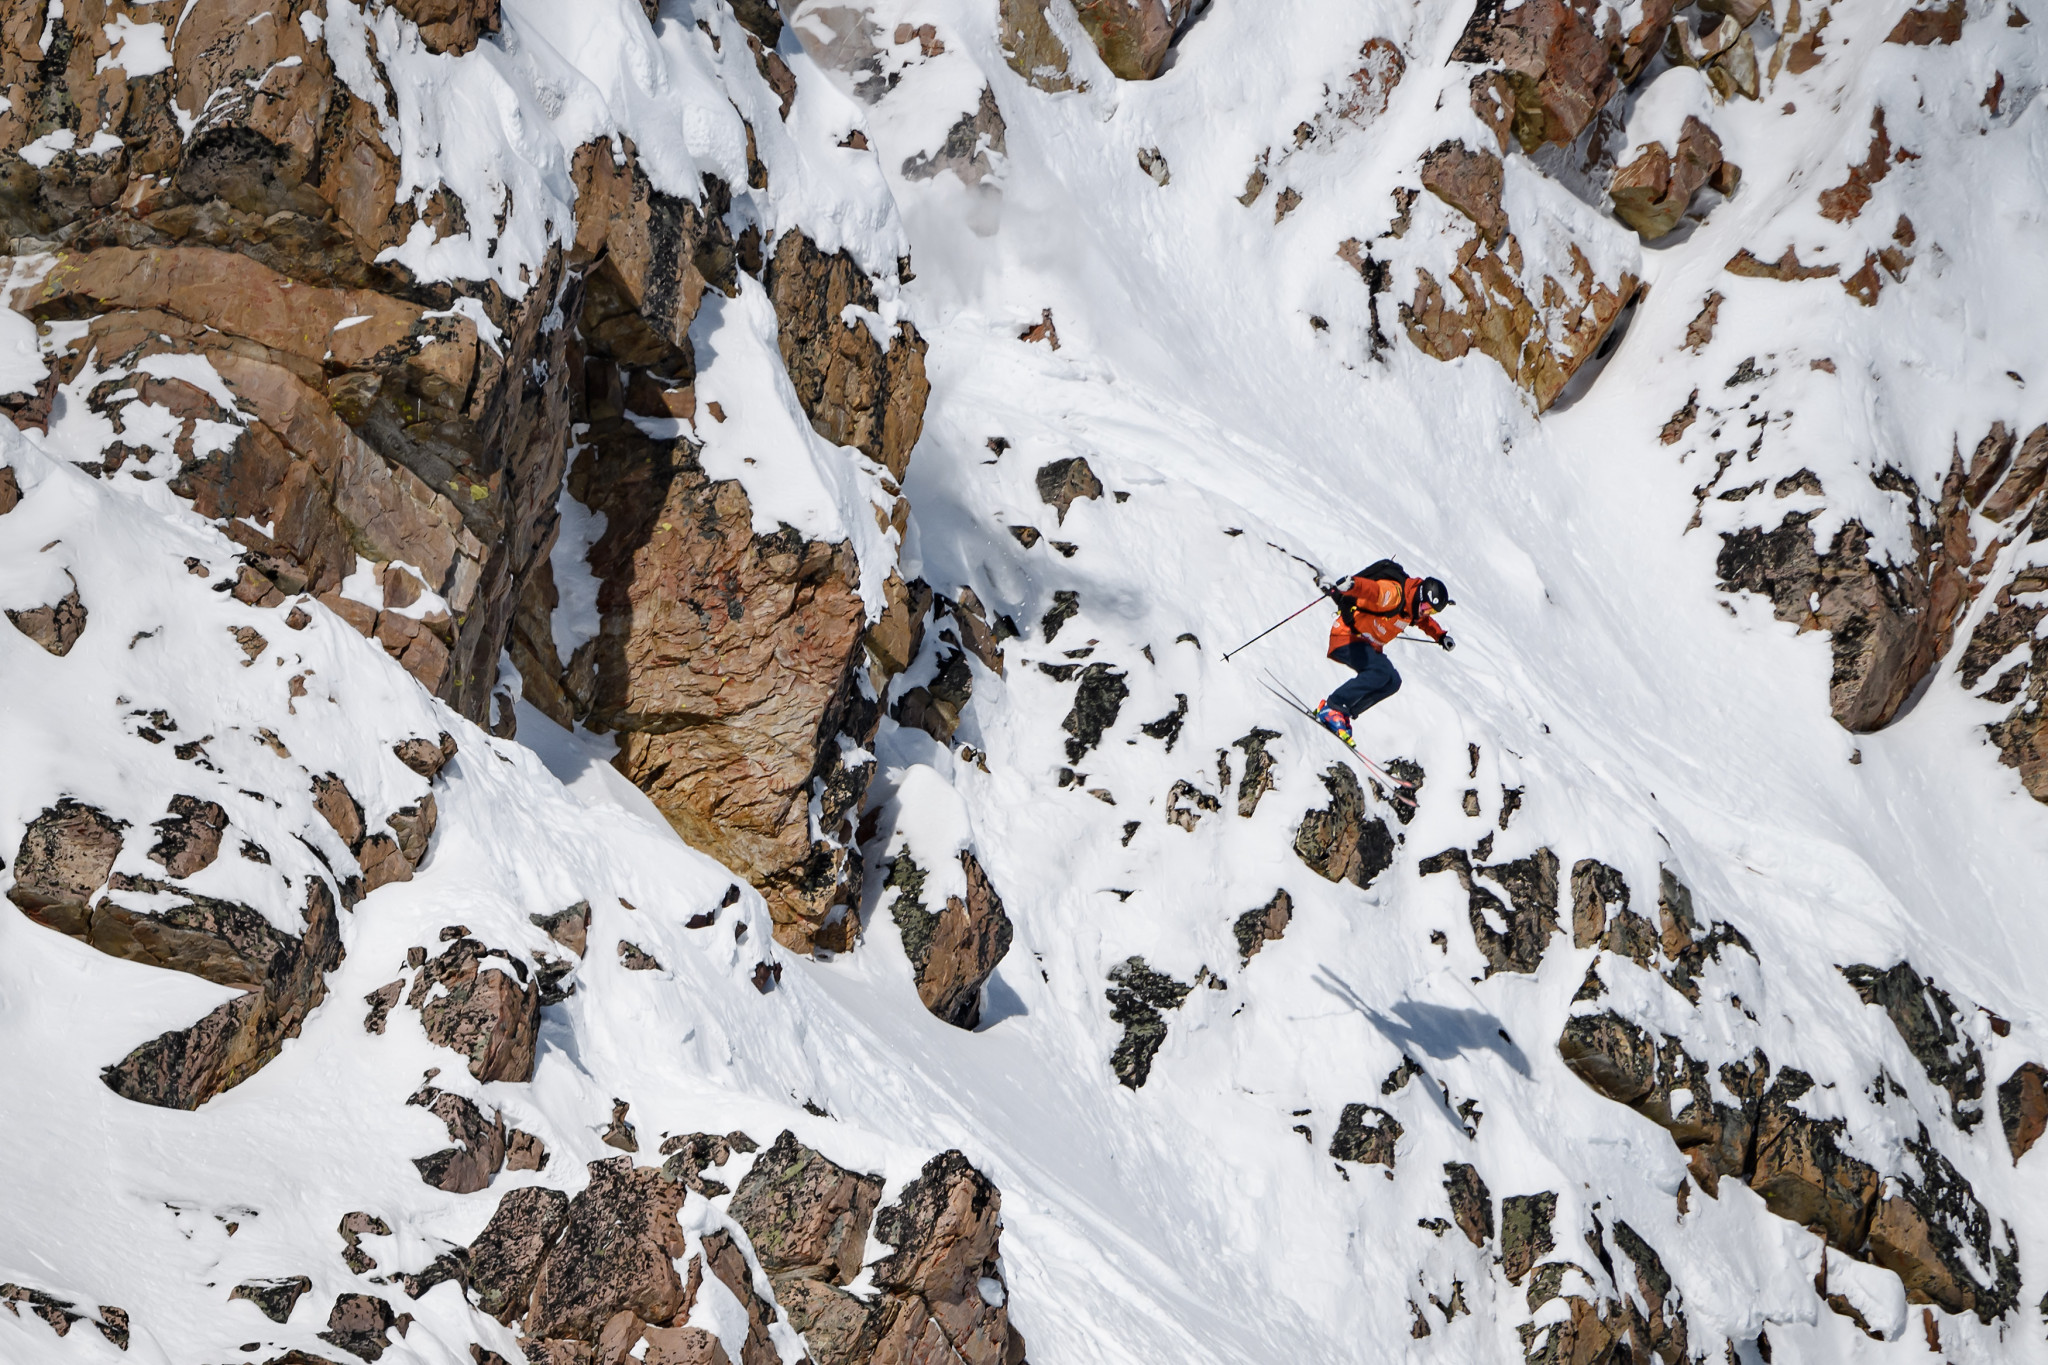 North American Ski Mountaineering Championships set to be held as part of three-day Steep Dreams Festival 